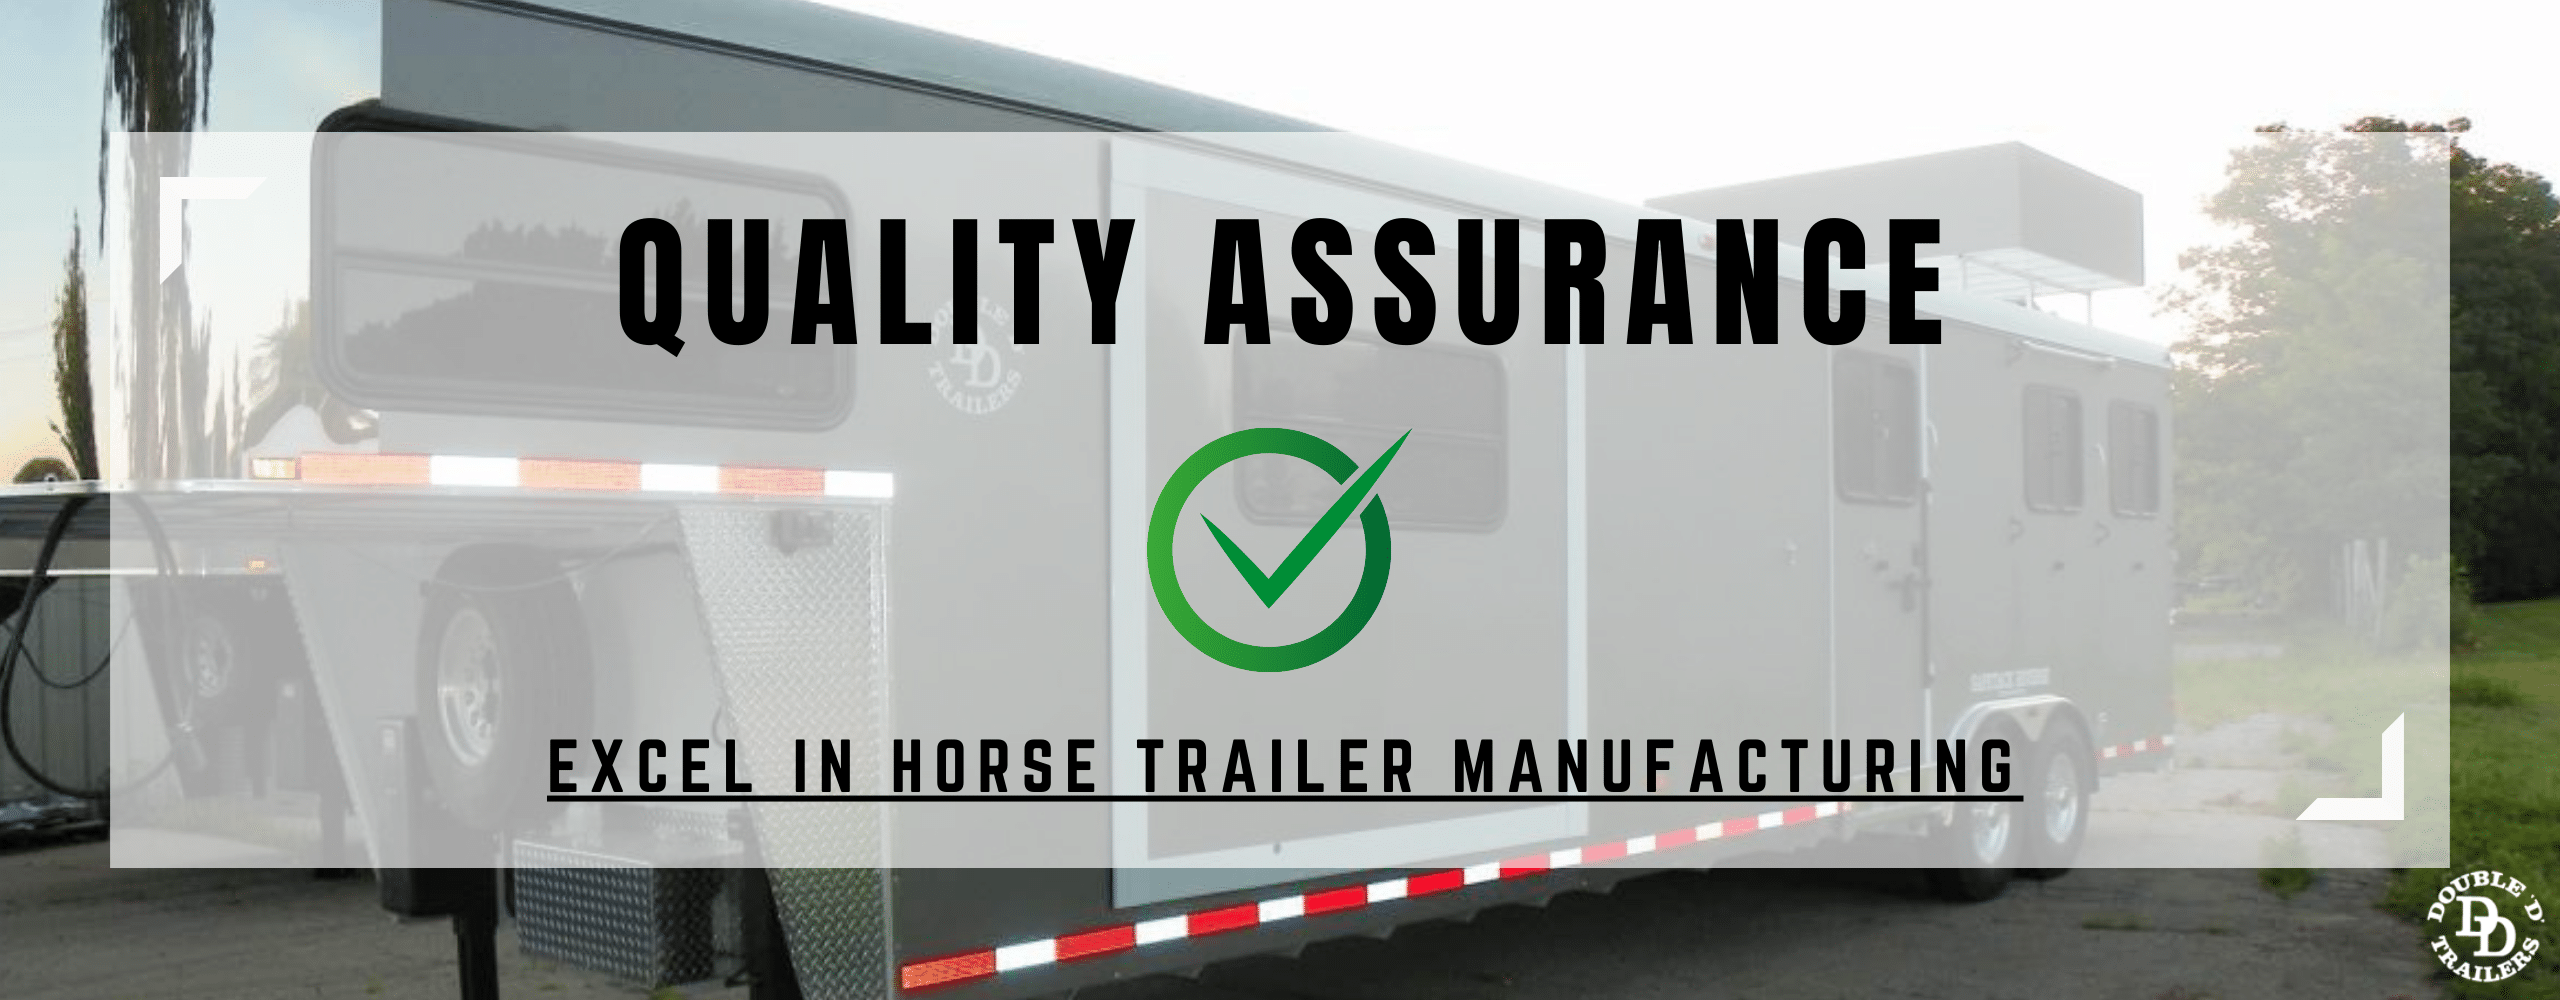 A Guide on Quality Assurance in Horse Trailer Manufacturing by Double D Trailers